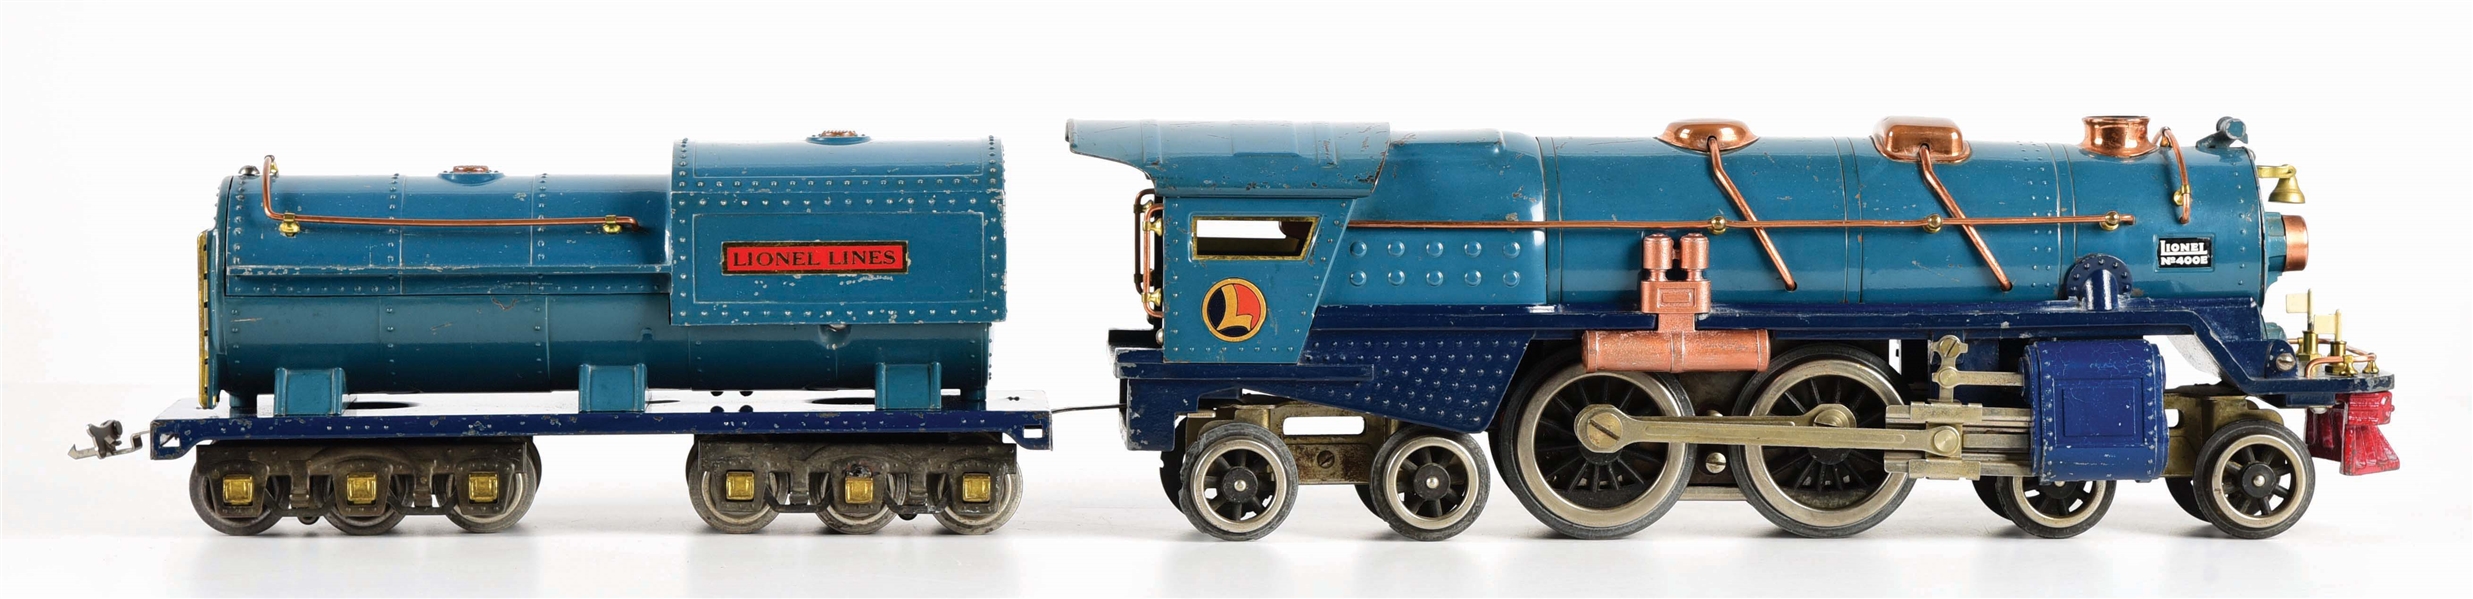 LIONEL STANDARD GUAGE BLUE COMET TRAIN STEAM ENGINE AND MATCHING TENDER.